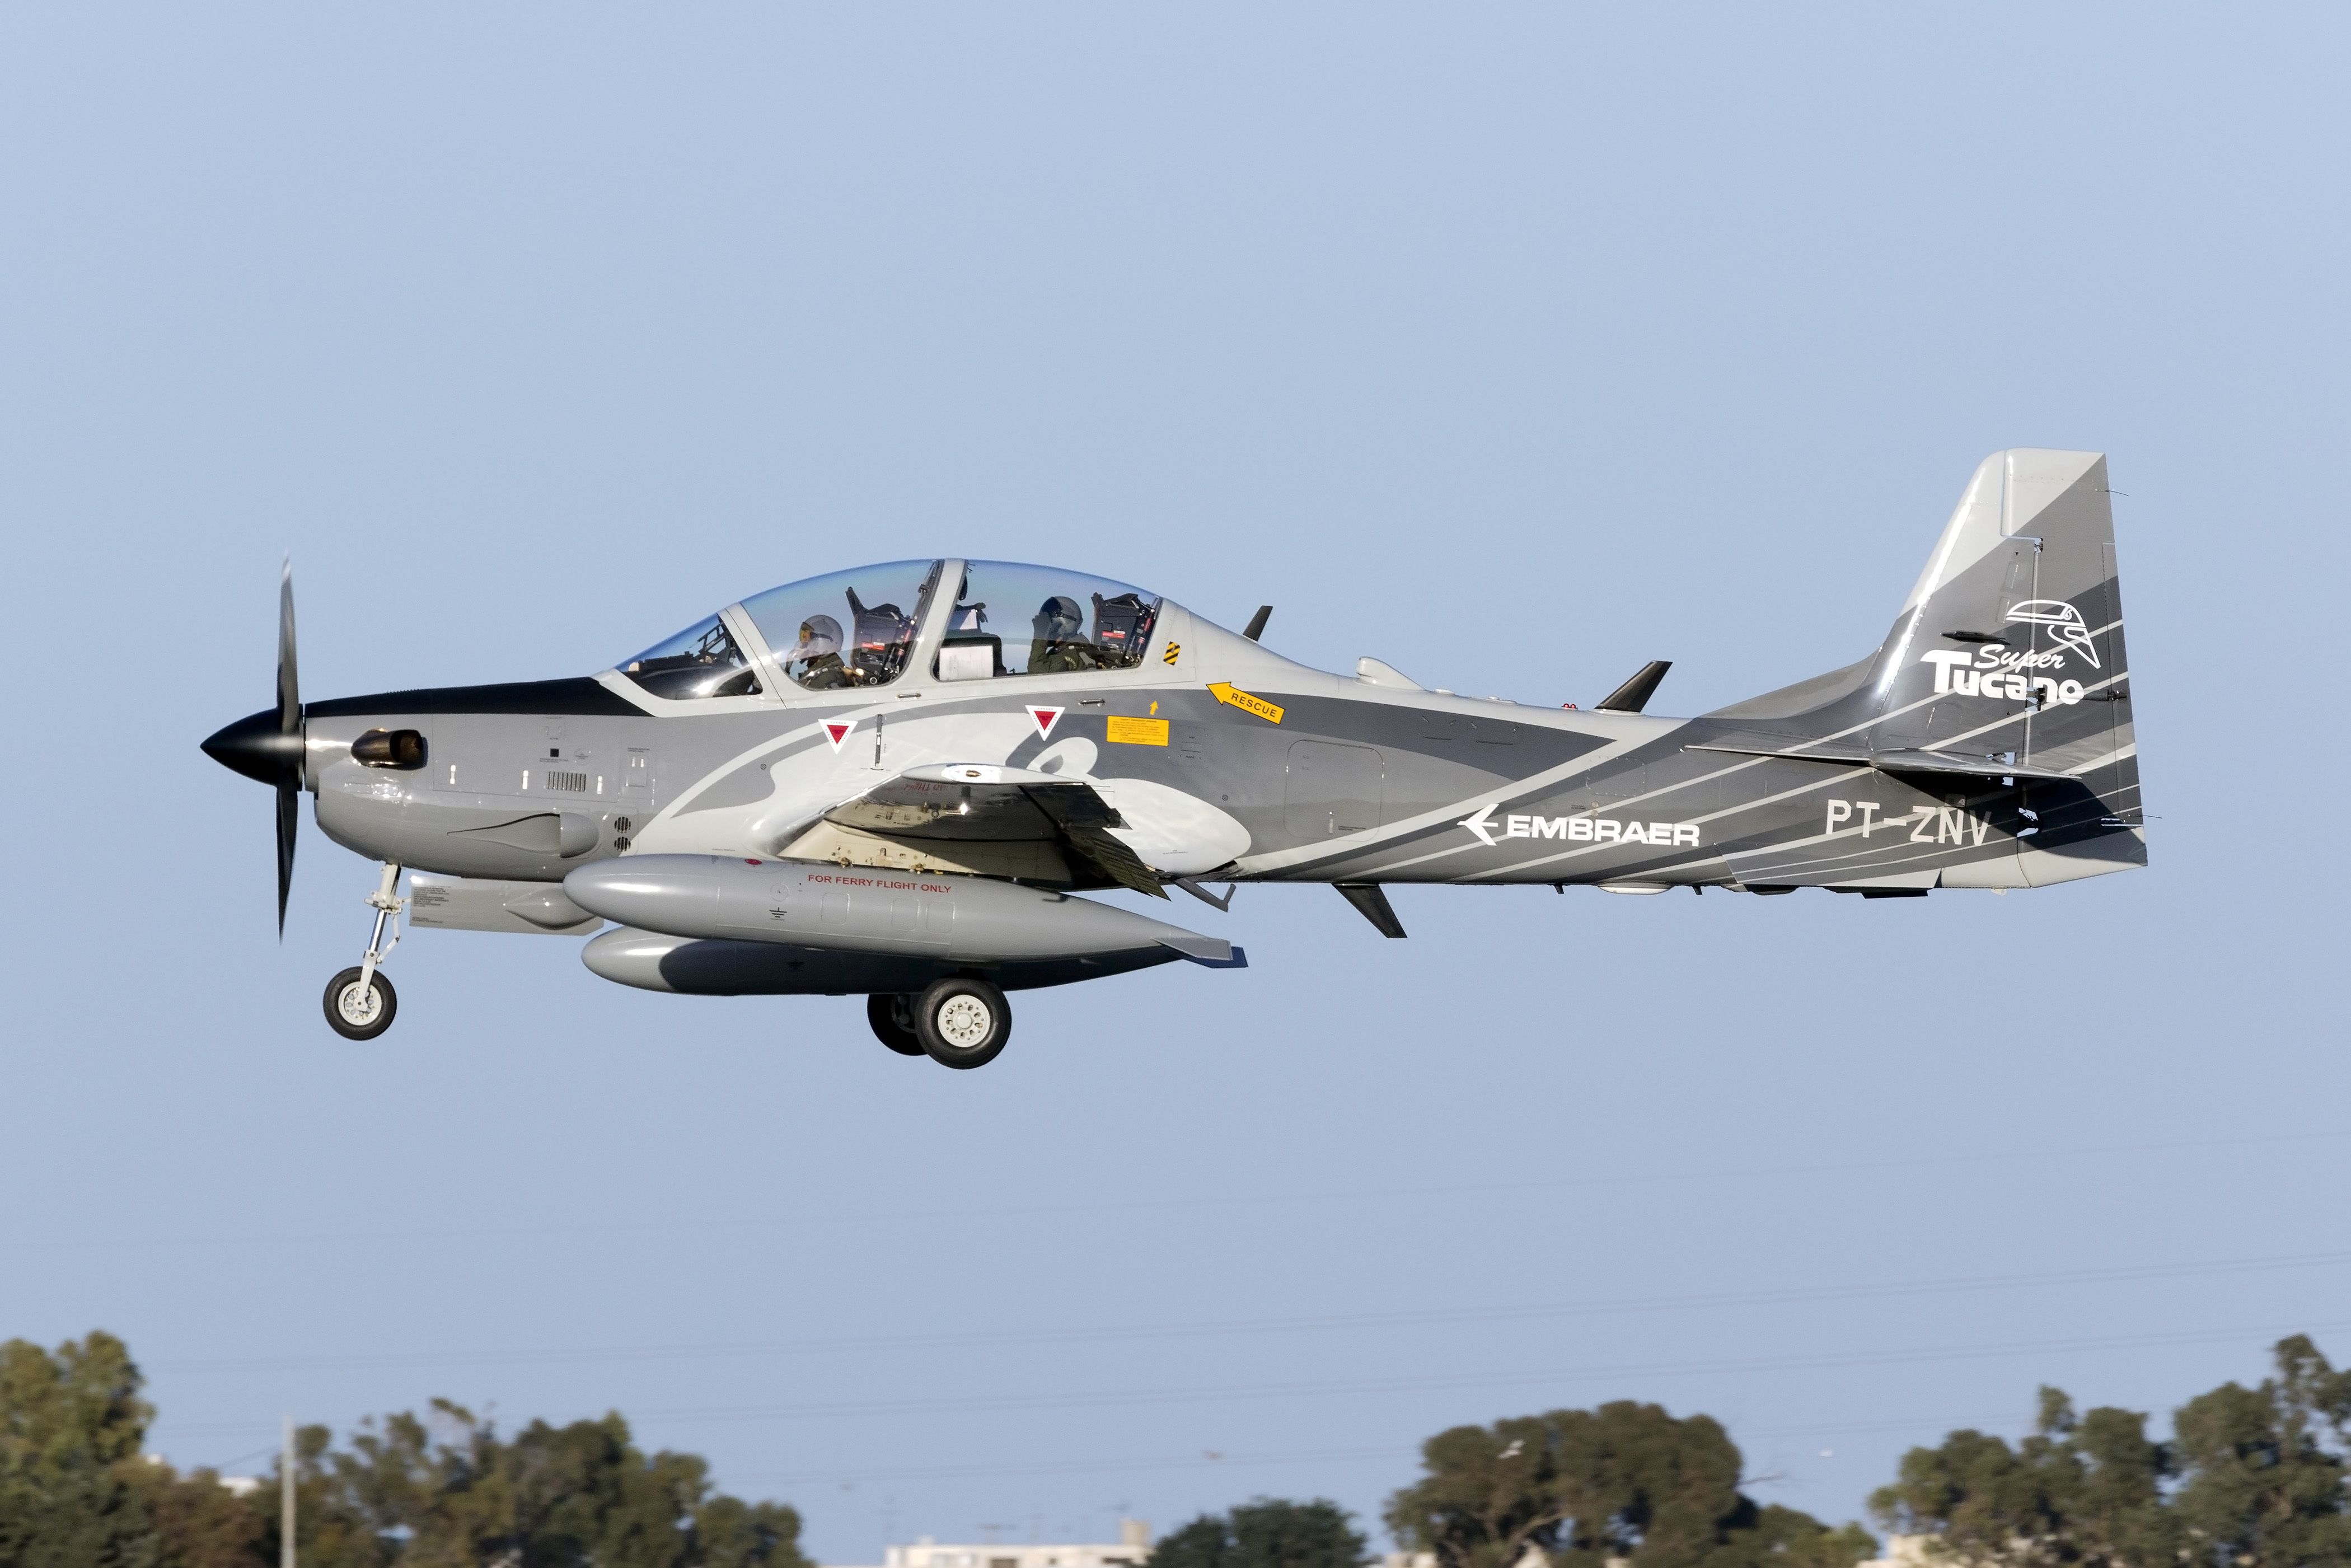 An Embraer A-29 Super Tucano flying in the sky.